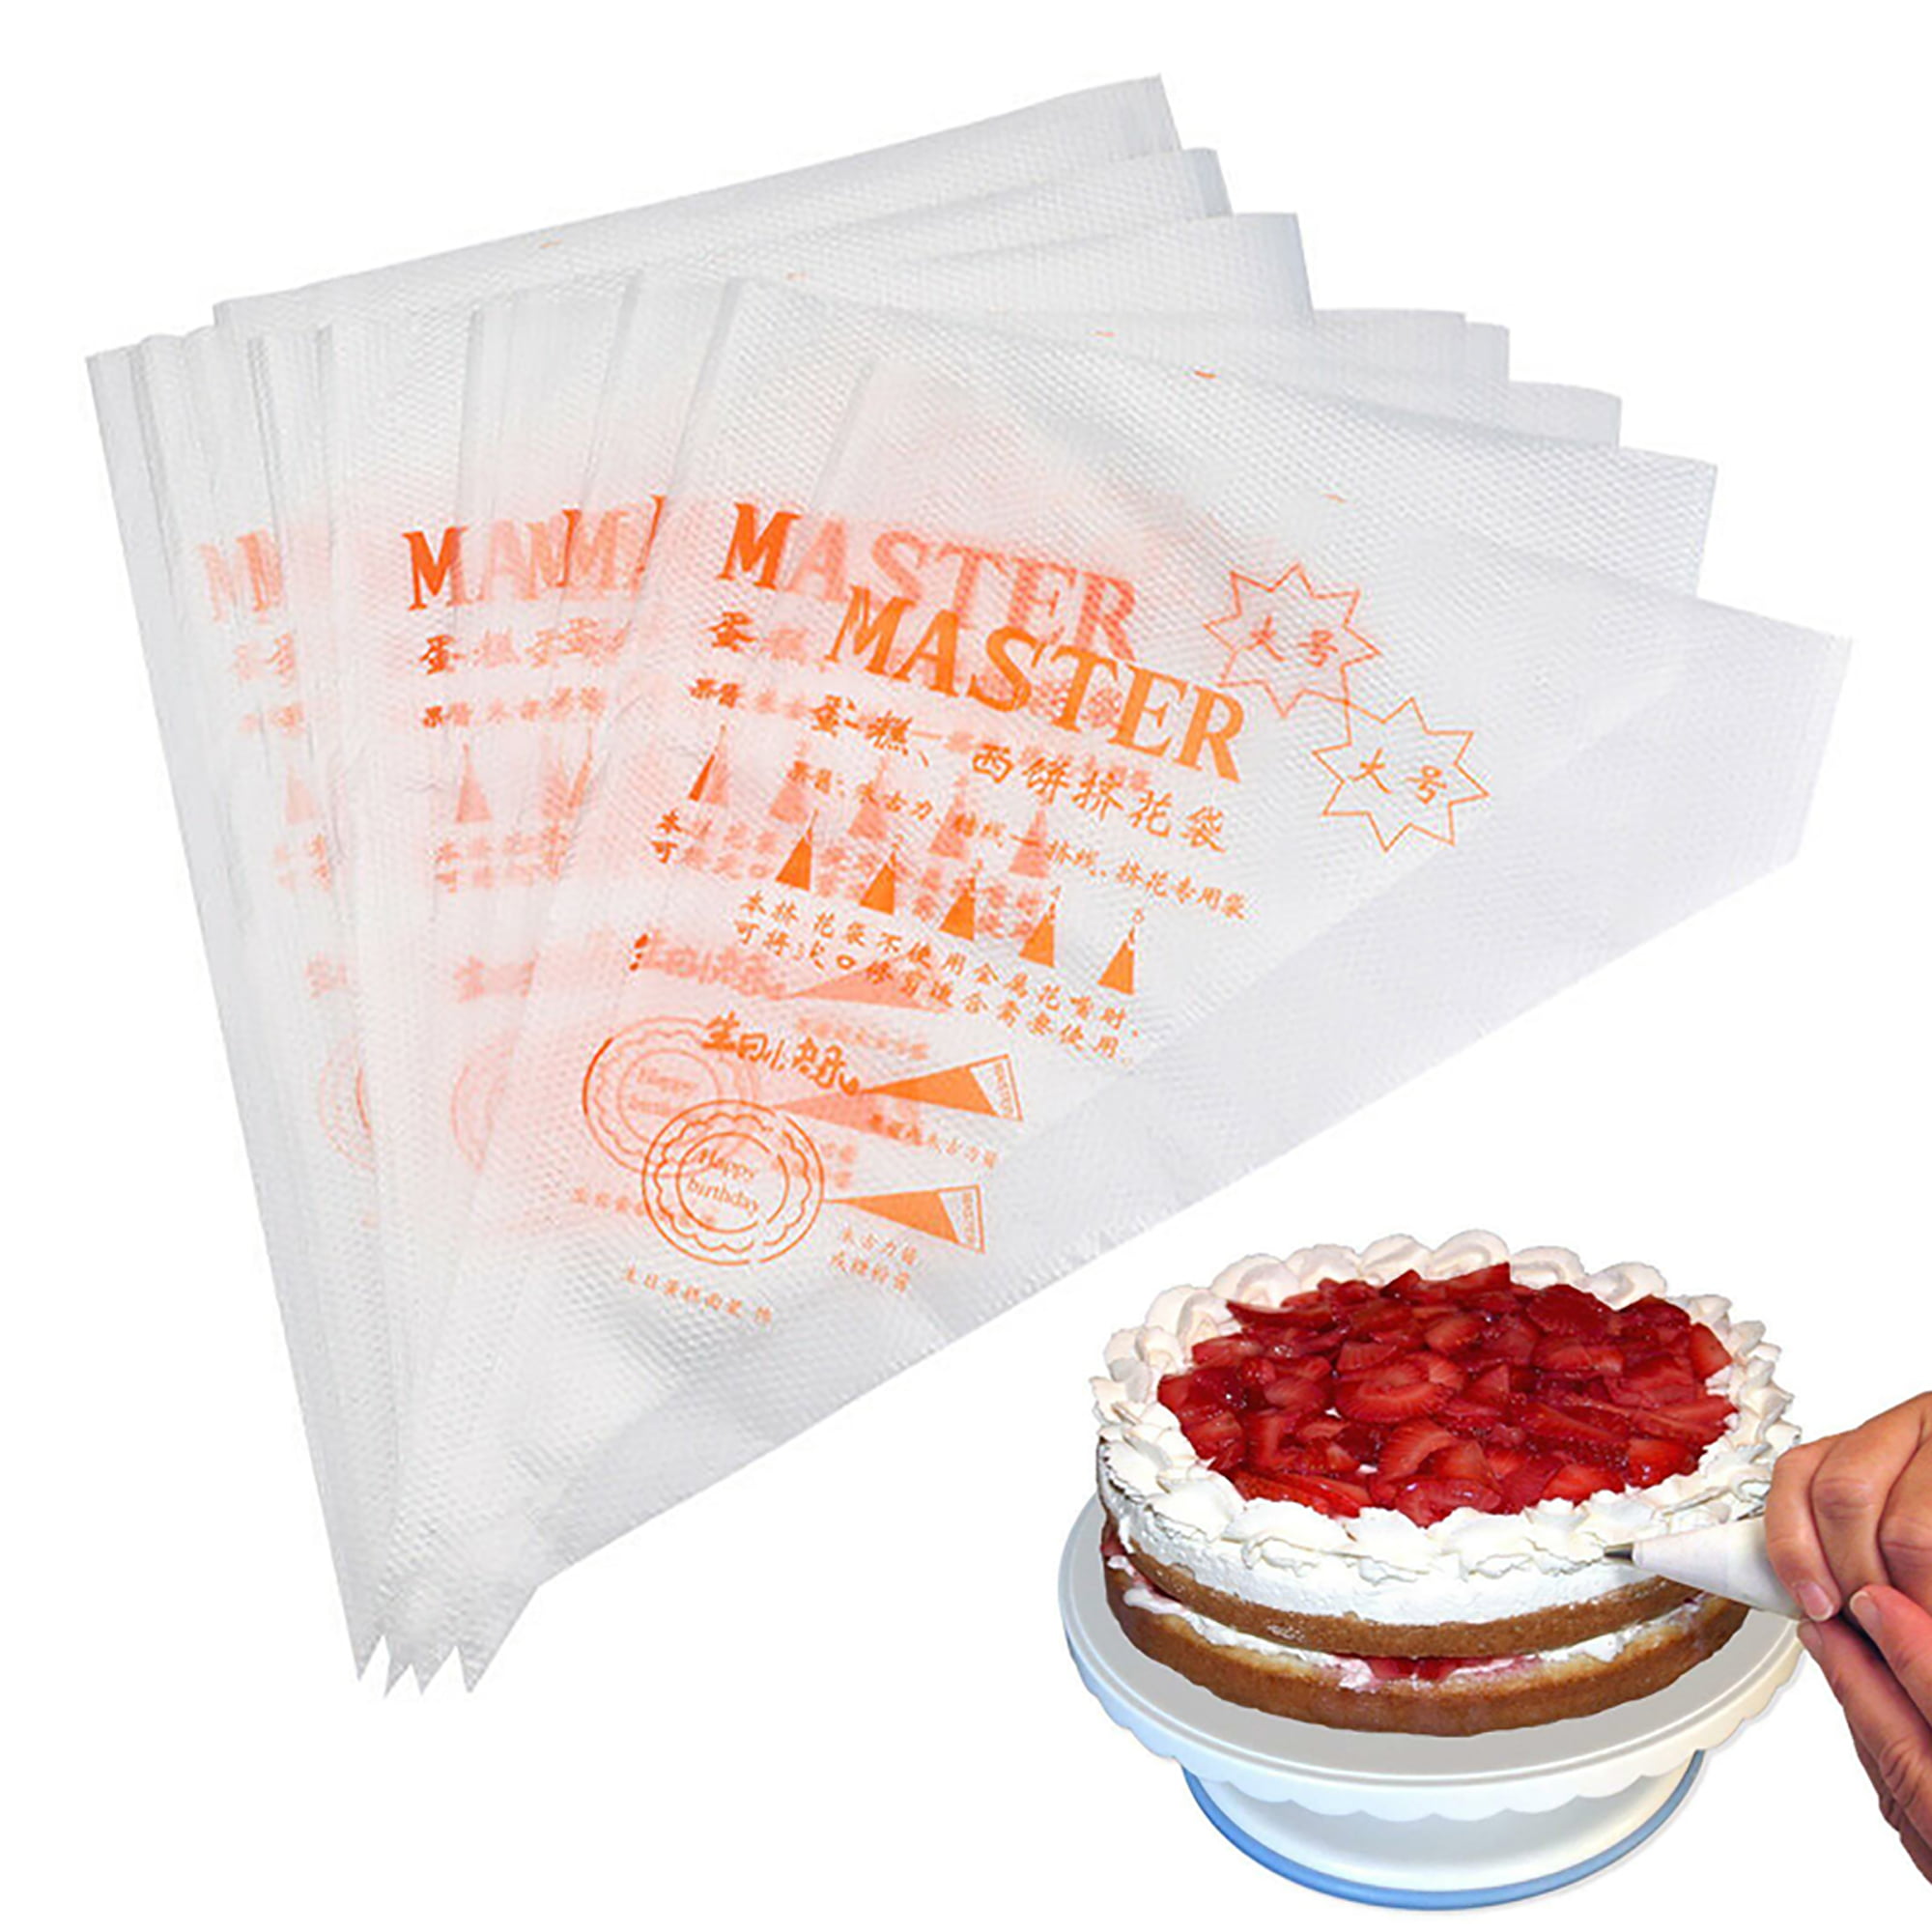 100pc Pack Plastic Disposable Icing Piping Pastry Bags Cake Decorating Tools Fan